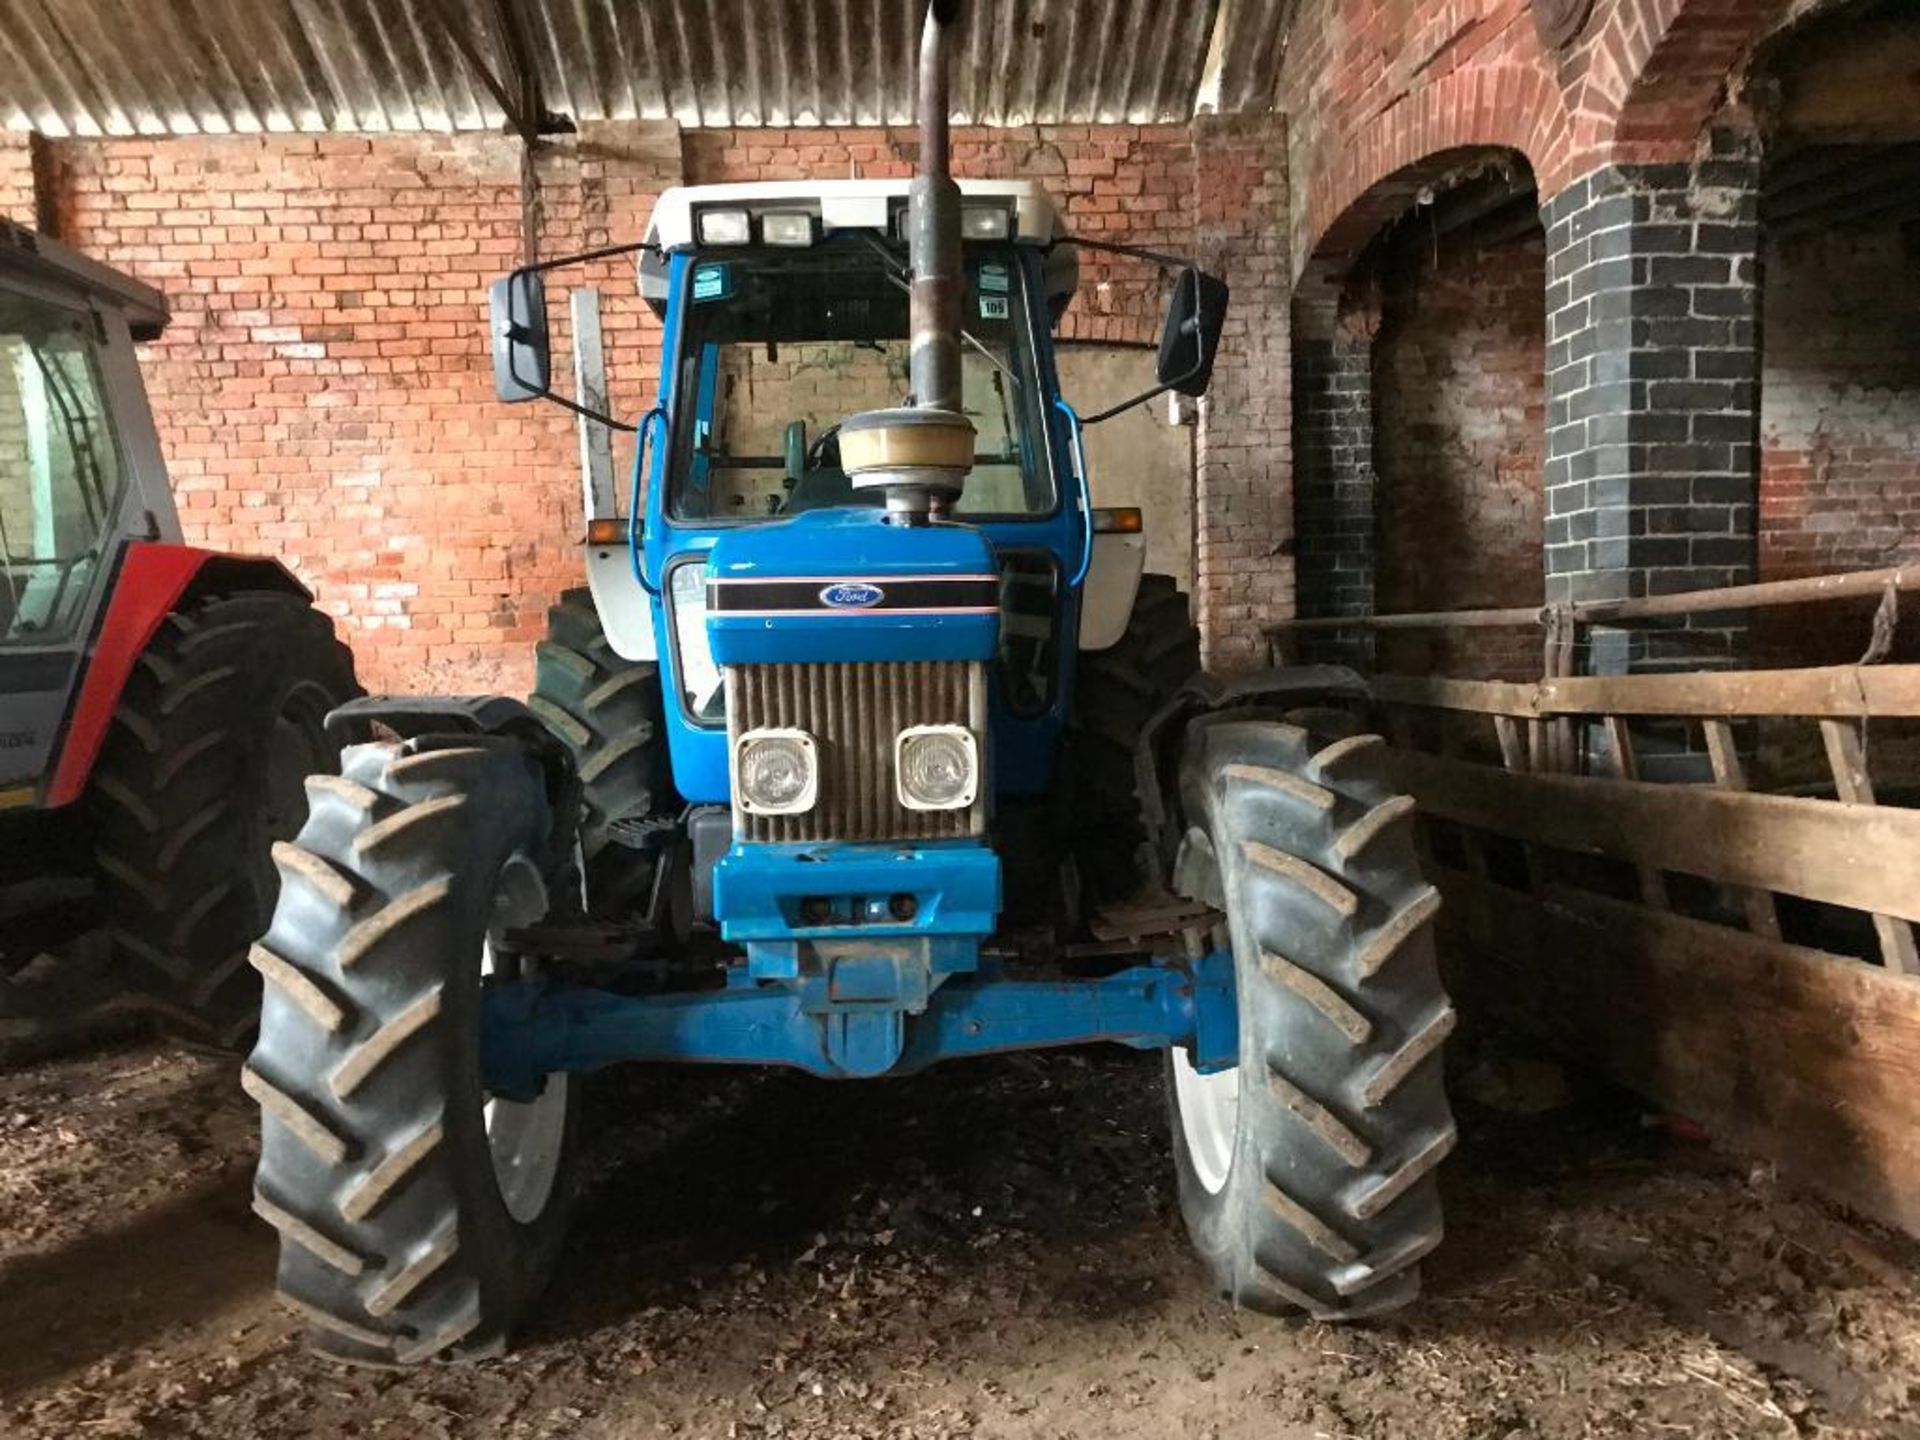 1991 Ford 7810, 16.9/38 & 13.6/28 Goodyear tyres, hours unknown